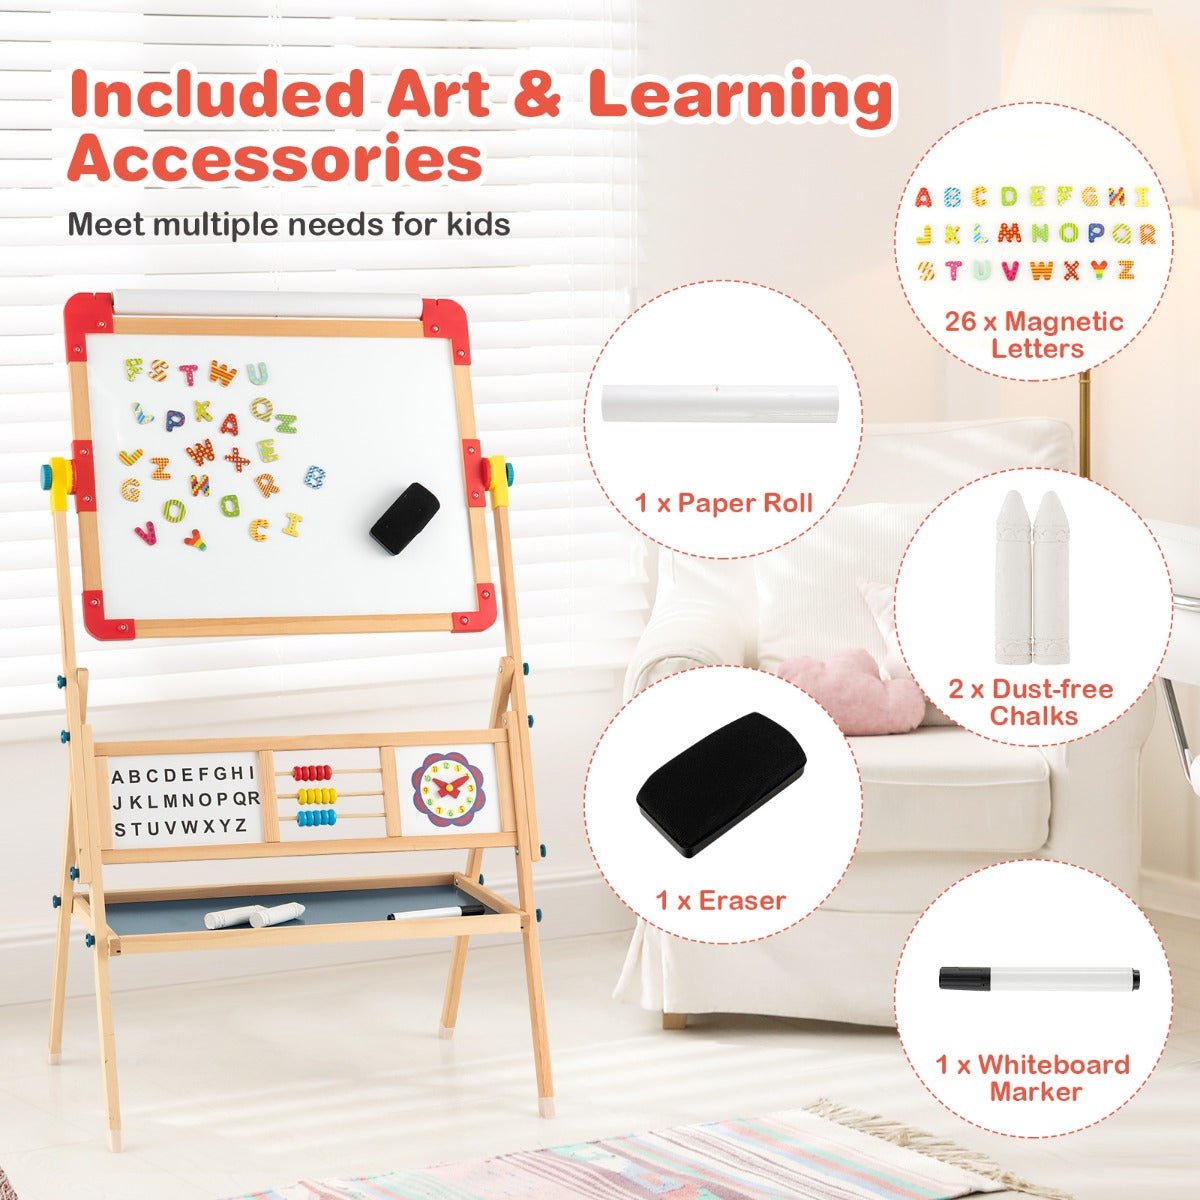 Rediscover Creativity with the 3-in-1 Wooden Easel - Order Now!